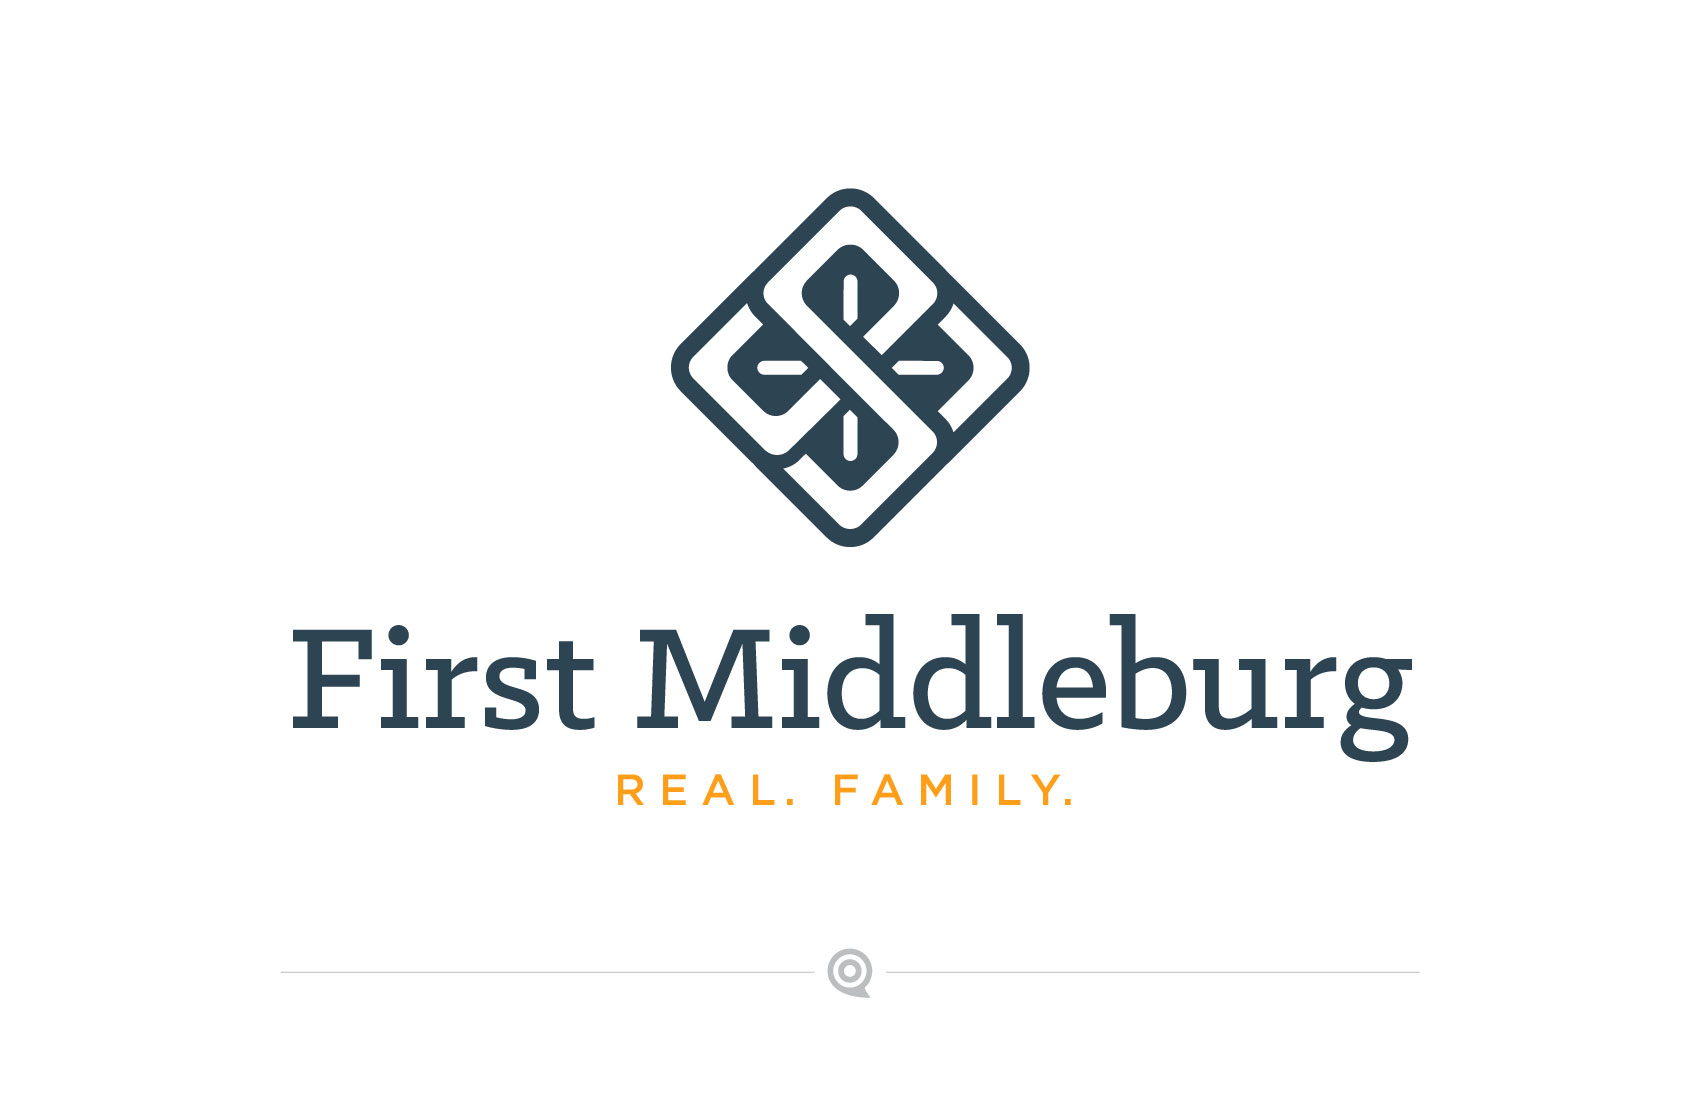 First Baptist Church Middleburg | Real. Family.